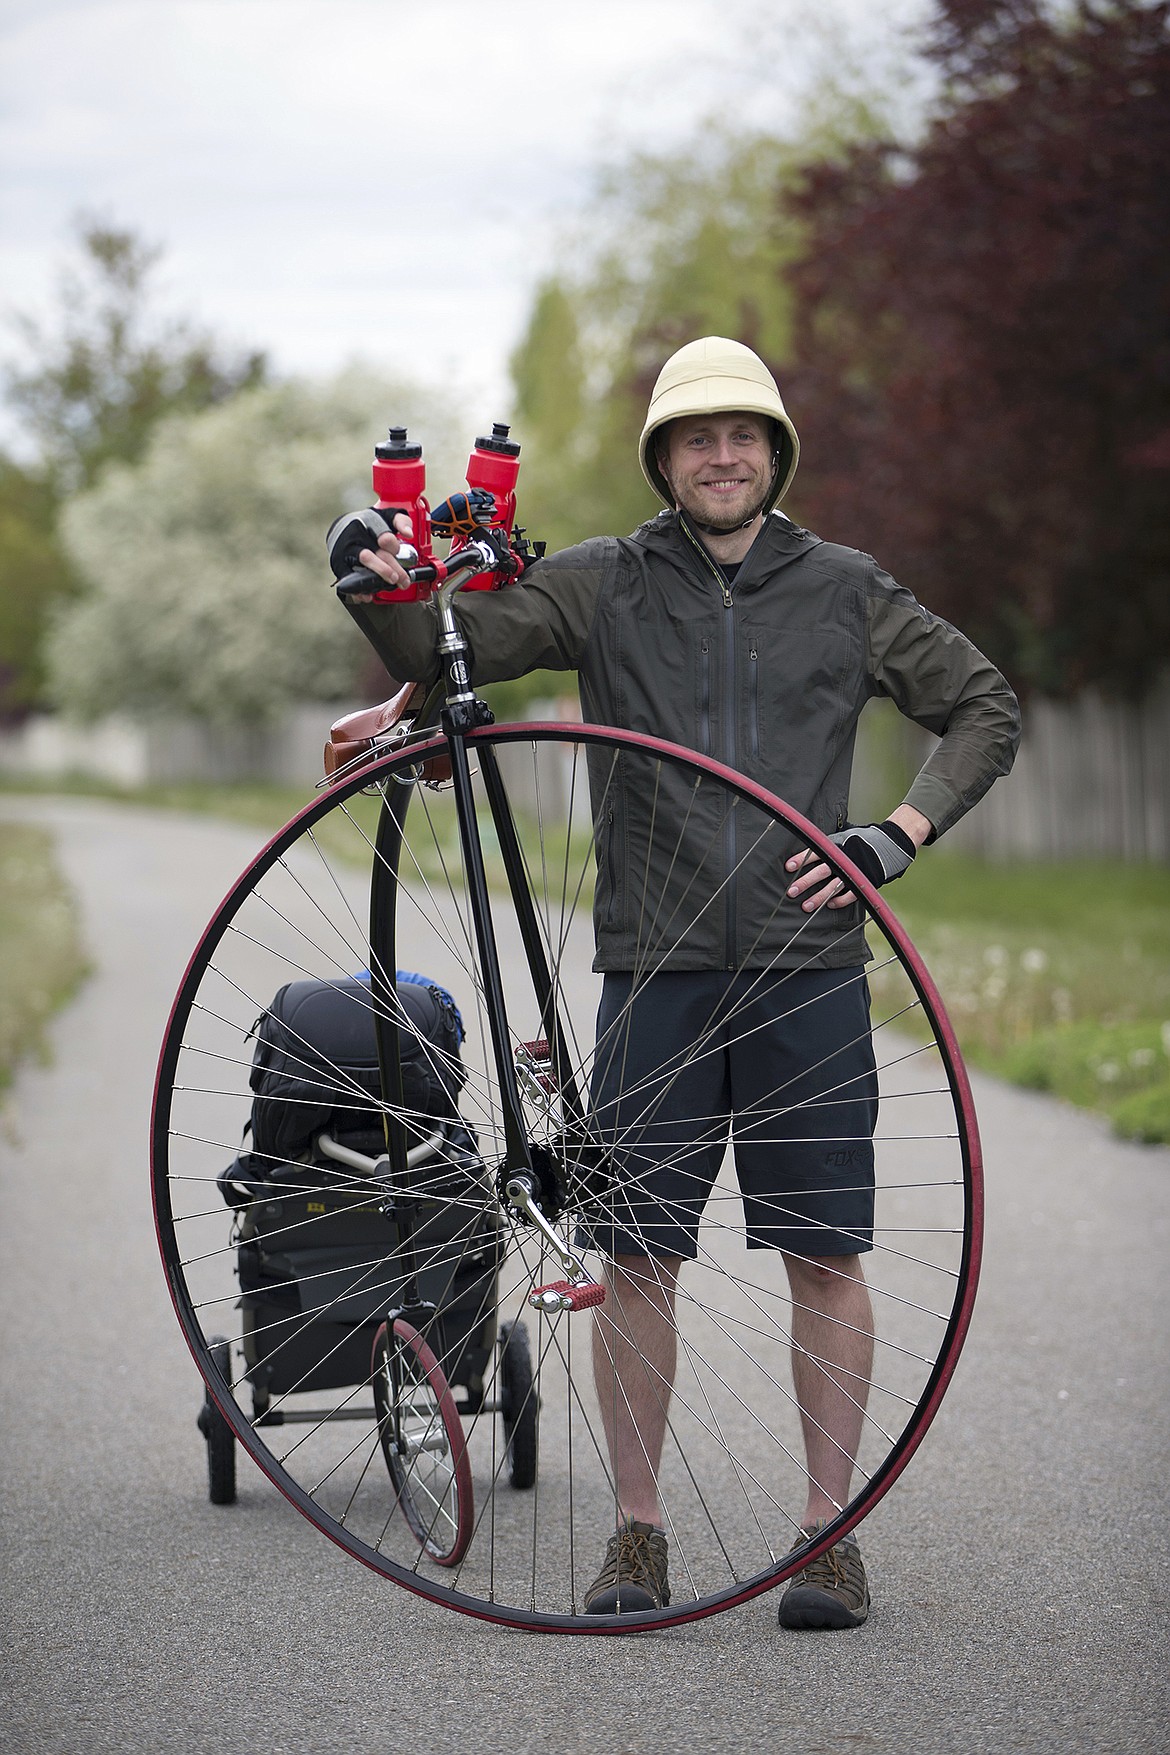 LISA JAMES/PressLocal adventurer Julian Redman stands with his penny-farthing bicycle on the bike path near his apartment off of Kathleen Ave. in Coeur d'Alene on Wednesday. Redman will be embarking on a cross-country trip Friday from San Francisco, following the path of Thomas Stevens, the first person to ride a bike across America in 1884. Redman's bicycle is a custom built replica of the bike Stevens rode.